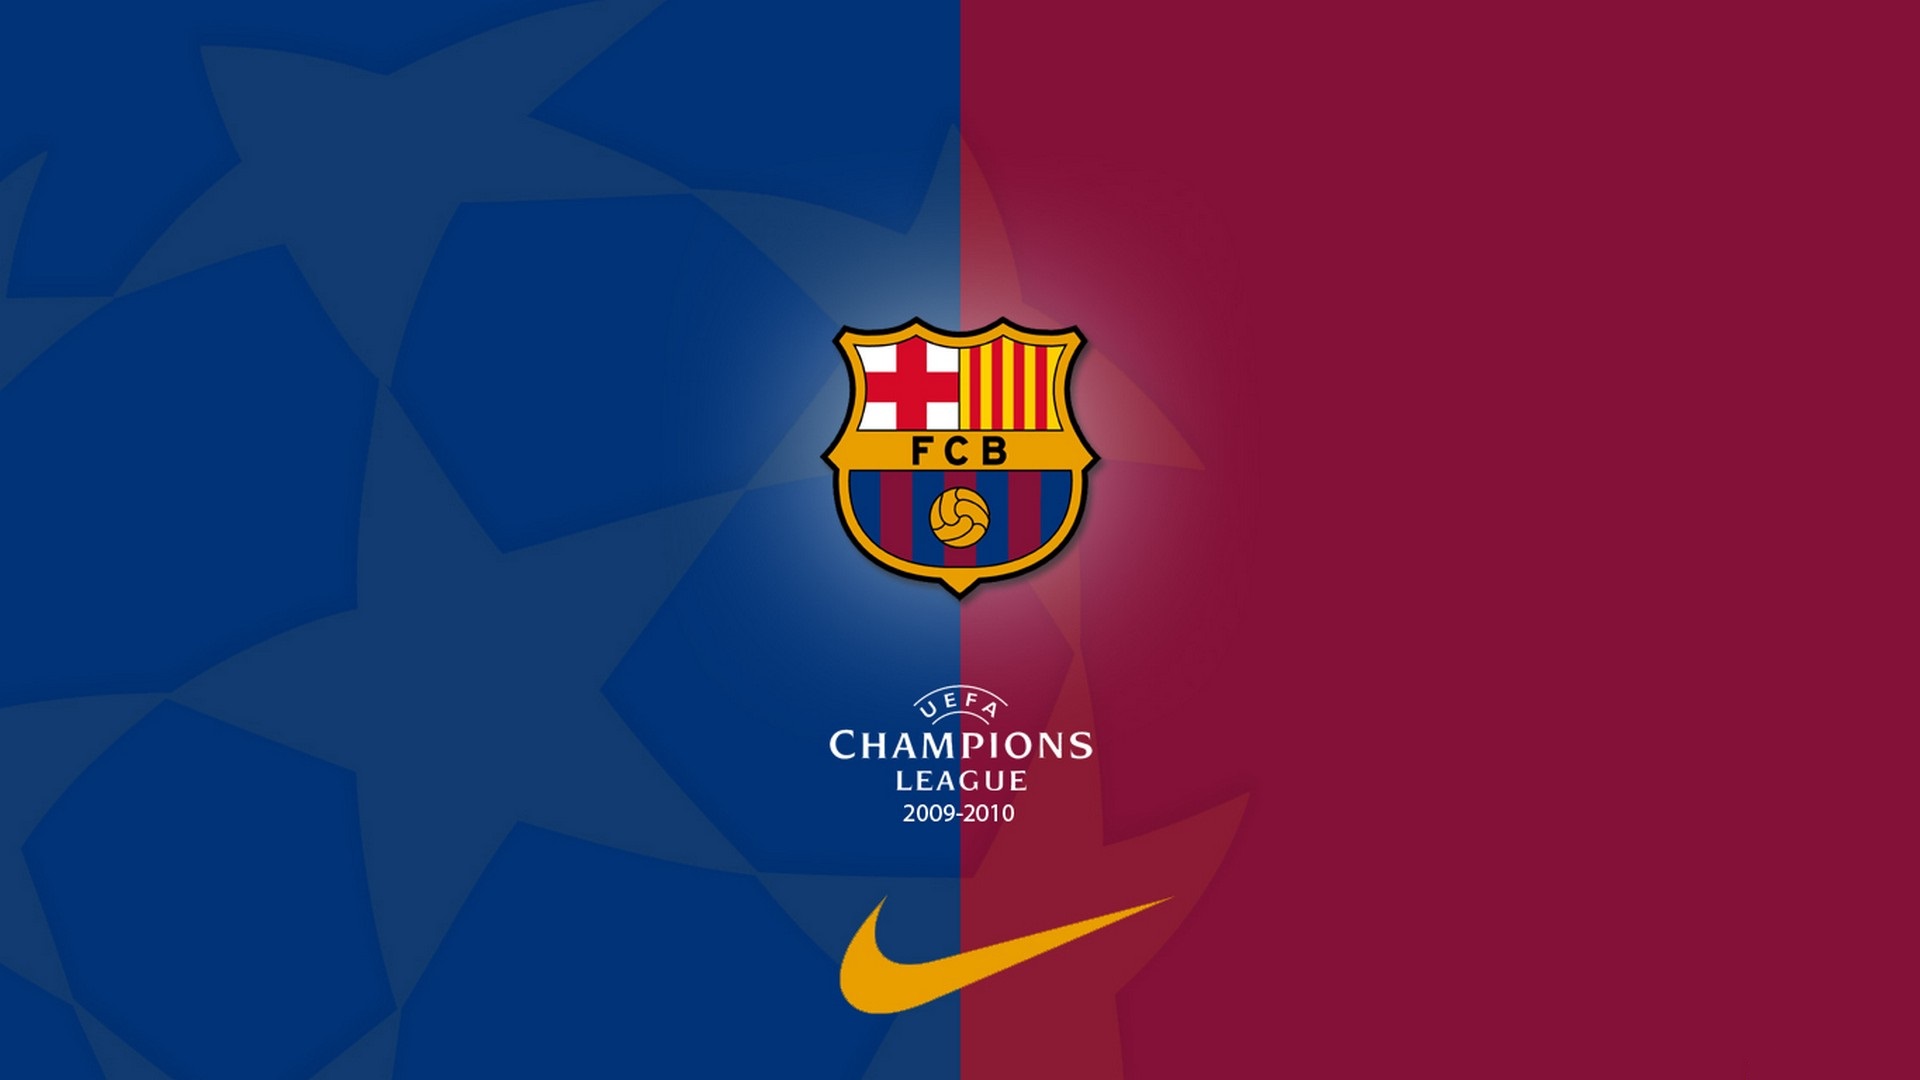 Barcelona Logo Desktop Wallpapers With high-resolution 1920X1080 pixel. You can use this wallpaper for your Desktop Computers, Mac Screensavers, Windows Backgrounds, iPhone Wallpapers, Tablet or Android Lock screen and another Mobile device